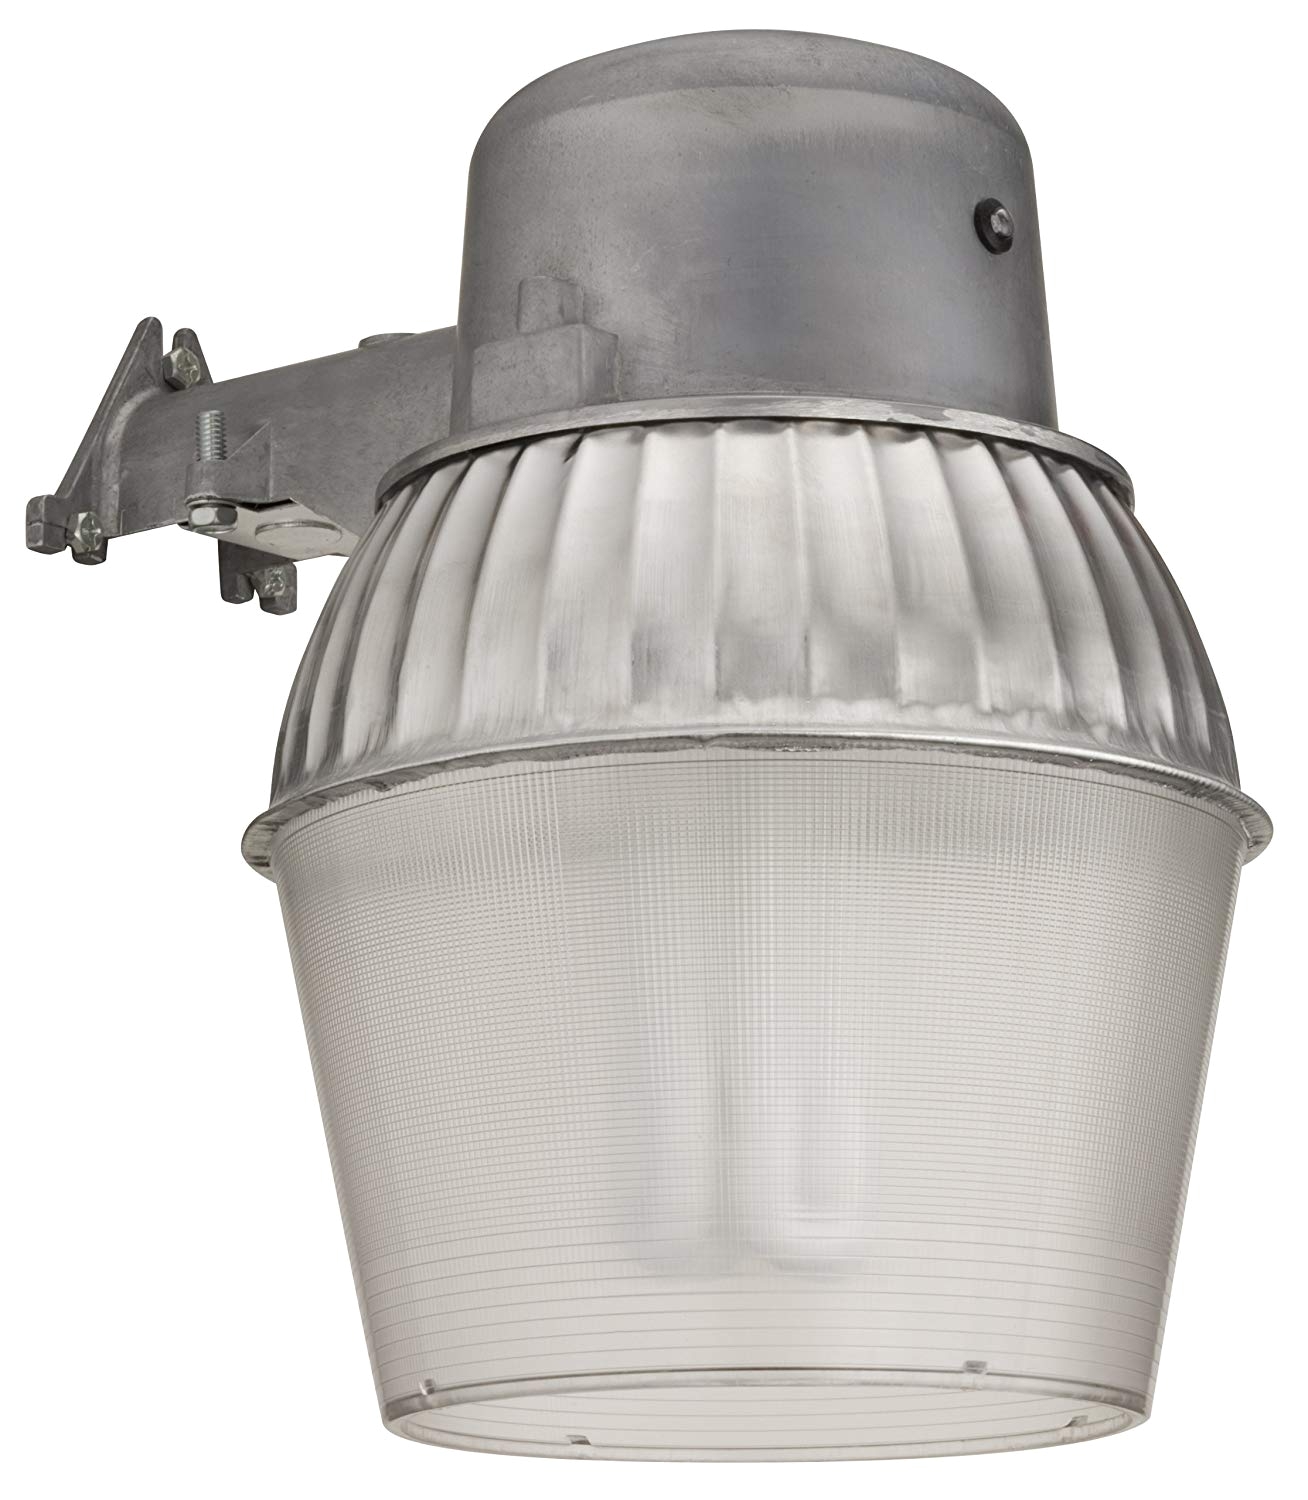 lithonia lighting oals10 65f 120 p lp m4 standard outdoor area light with 65 watt compact fluorescent compact quad tube commercial street and area